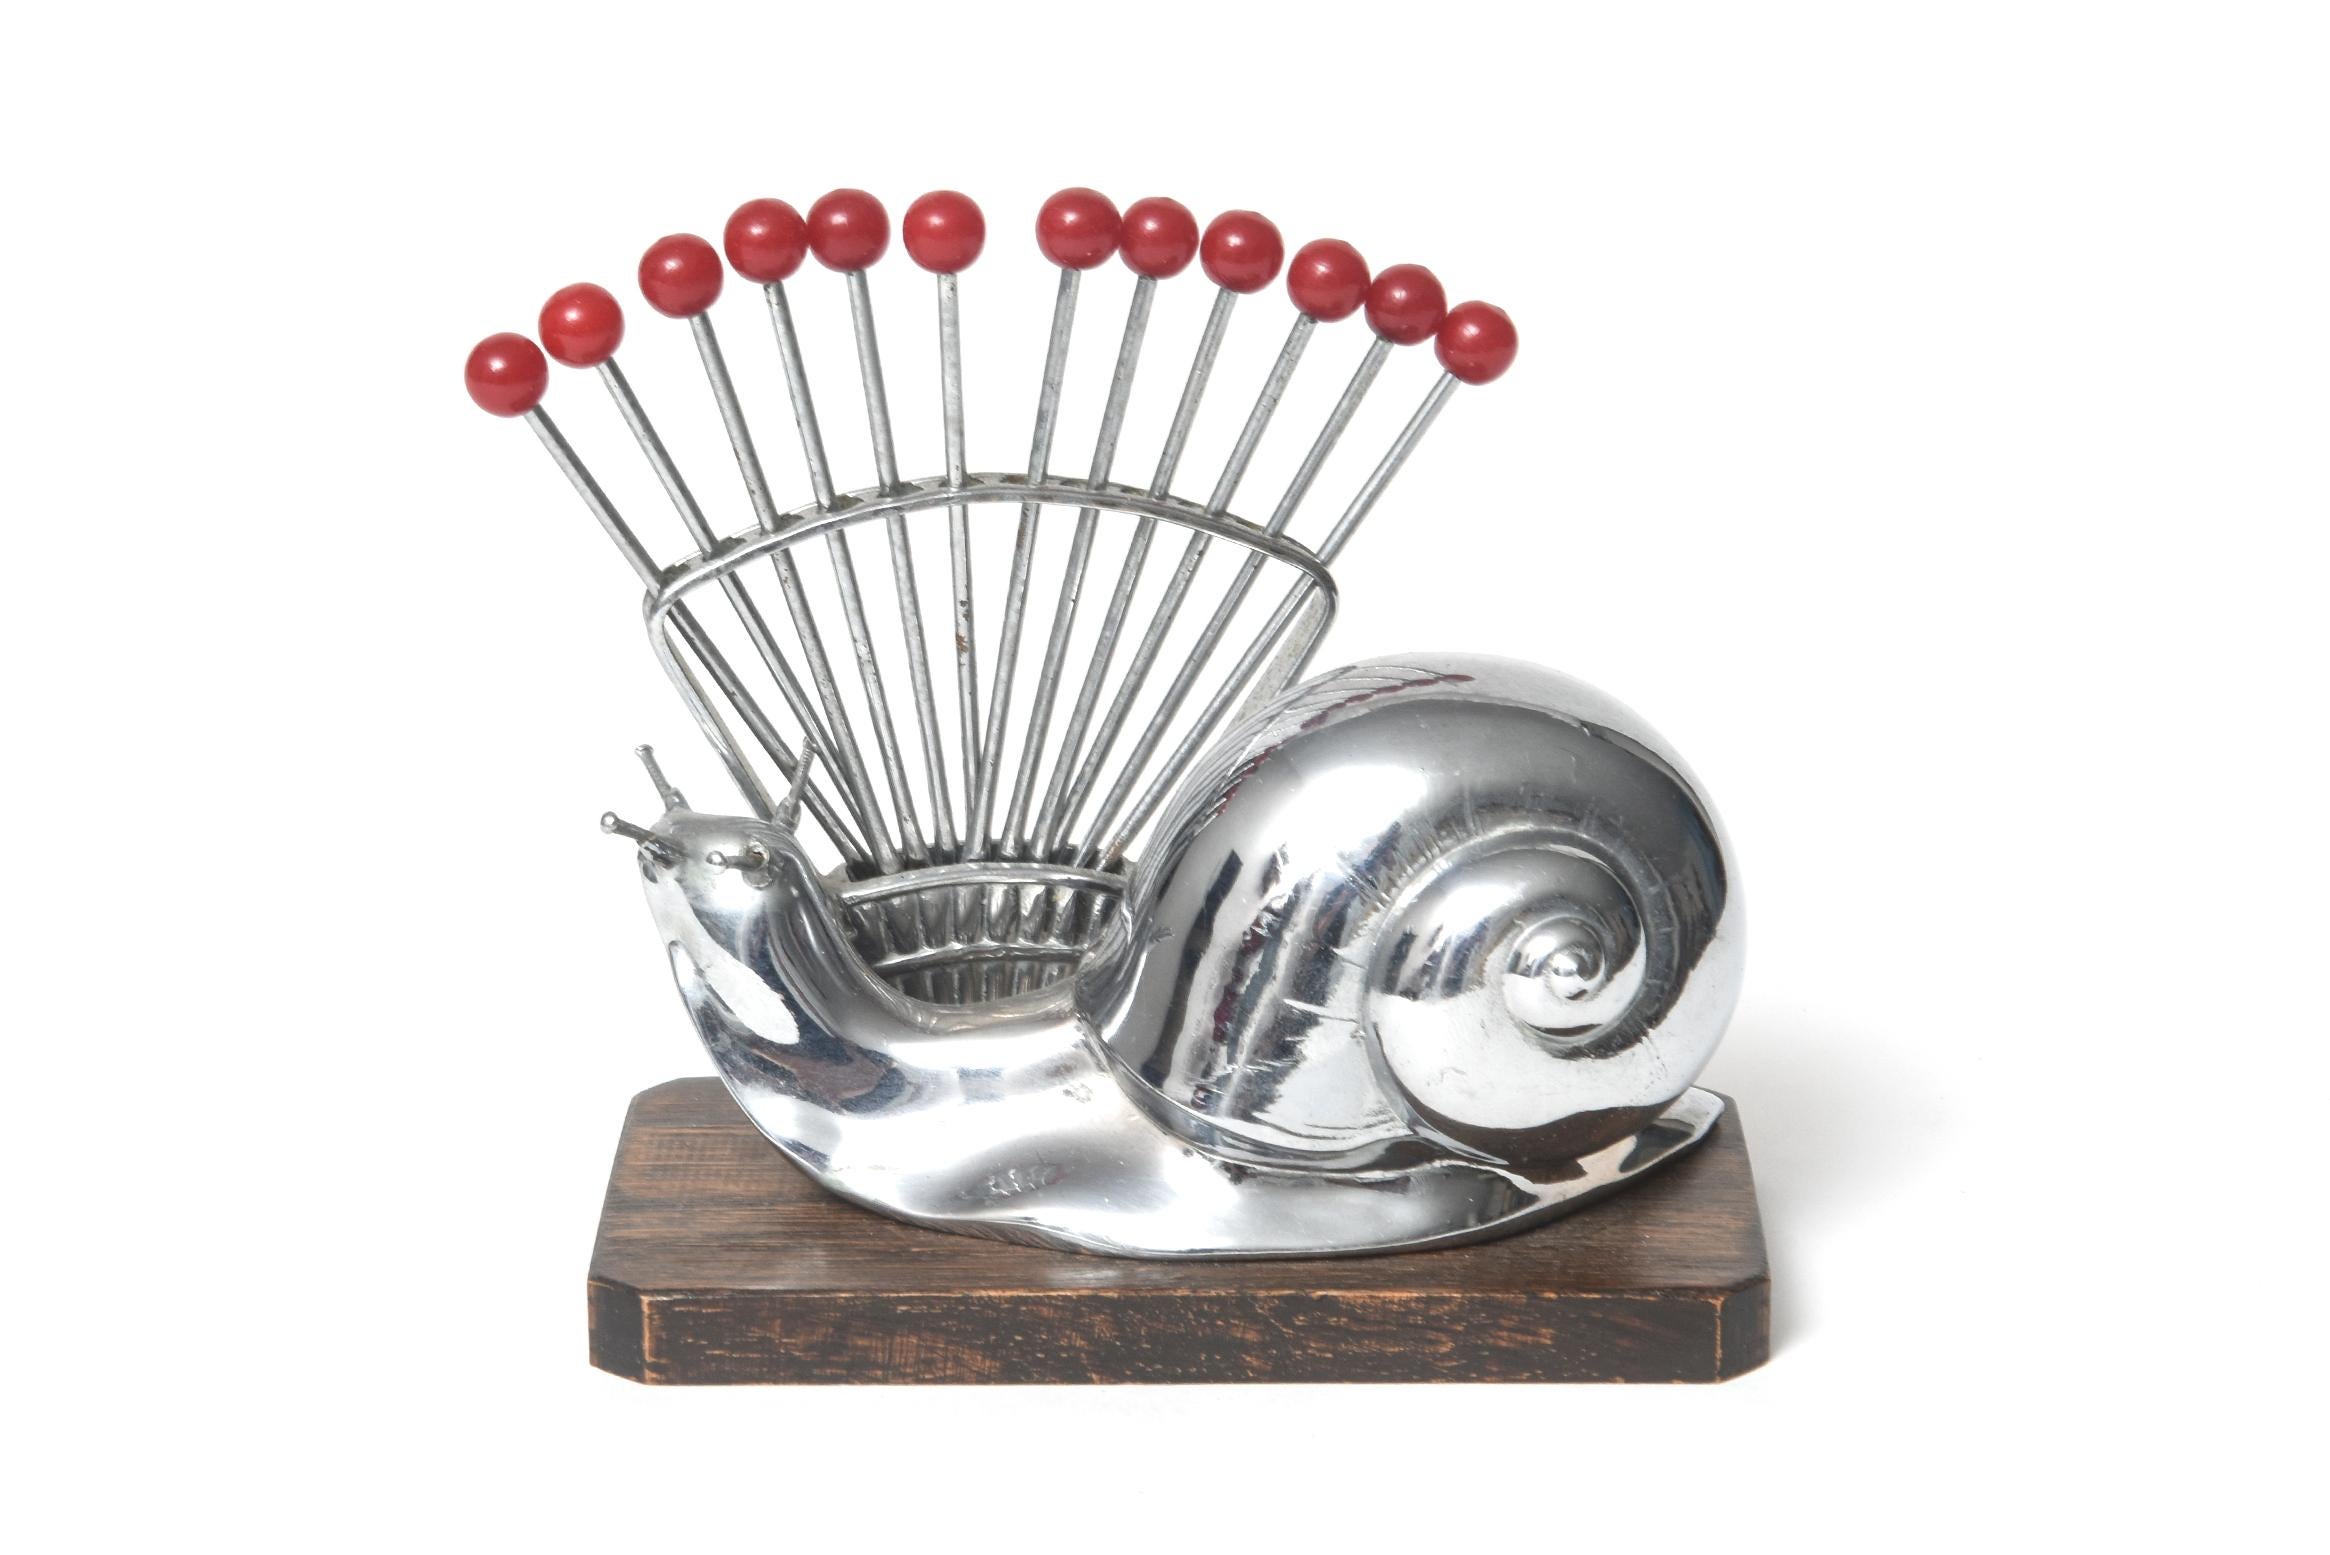 A French Art Deco cocktail pick set featuring a large chrome snail set on a mahogany base. The design is by the famed French Art Deco illustrator Benjamin Rabier, who had a side job designing entertaining barware. The twelve picks fan out behind the